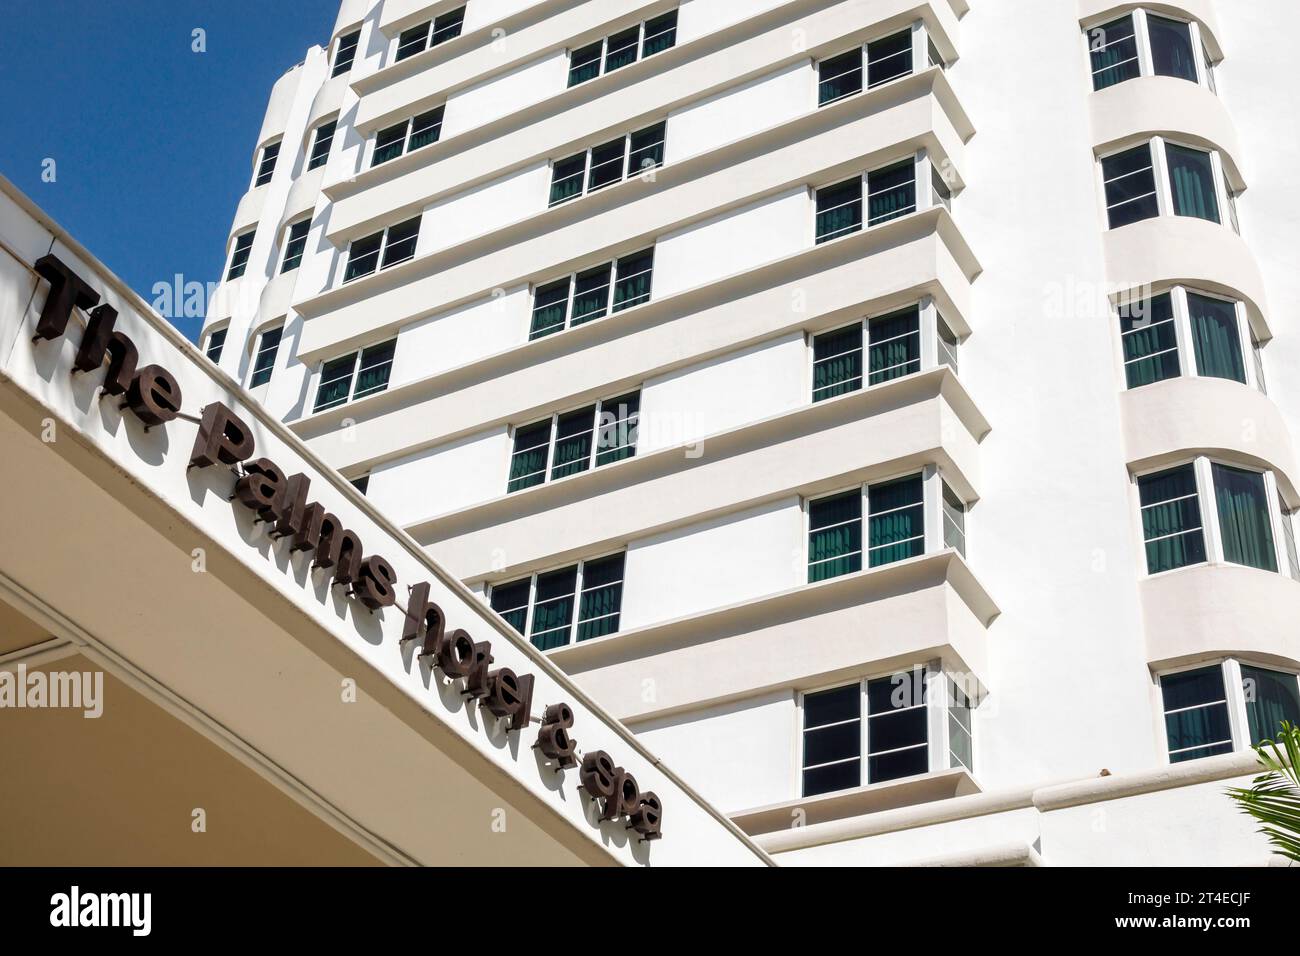 Miami Beach Florida,outside exterior,building front entrance hotel,Collins Avenue,The Palms Hotel & Spa sign,hotels motels businesses Stock Photo